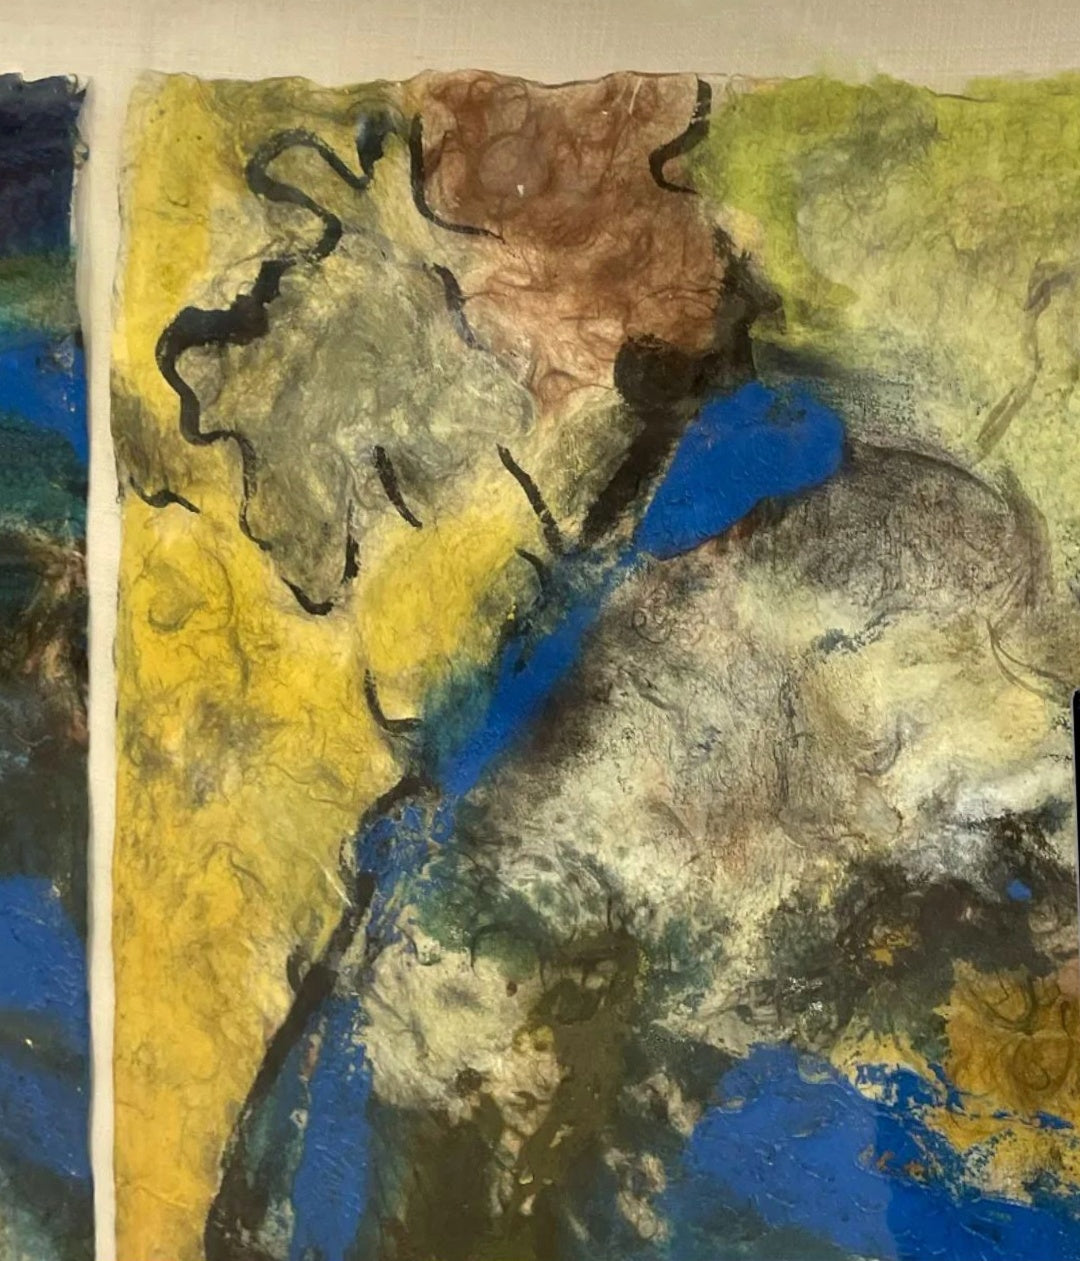 ABSTRACT TRIPTYCH - MIXED MEDIA ON HANDMADE PAPER SIGNED "KQ" (1970s)